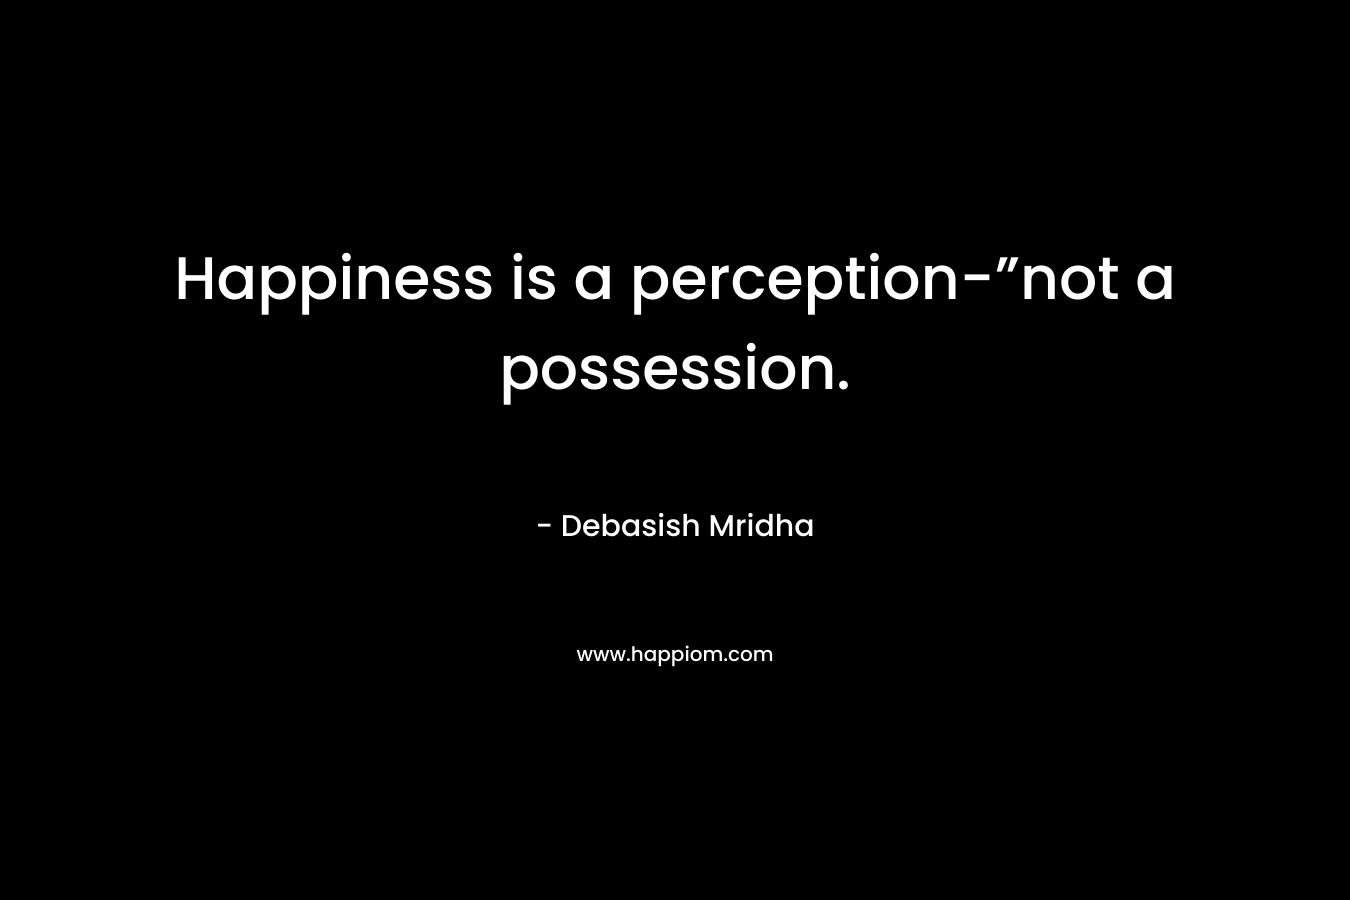 Happiness is a perception-”not a possession.